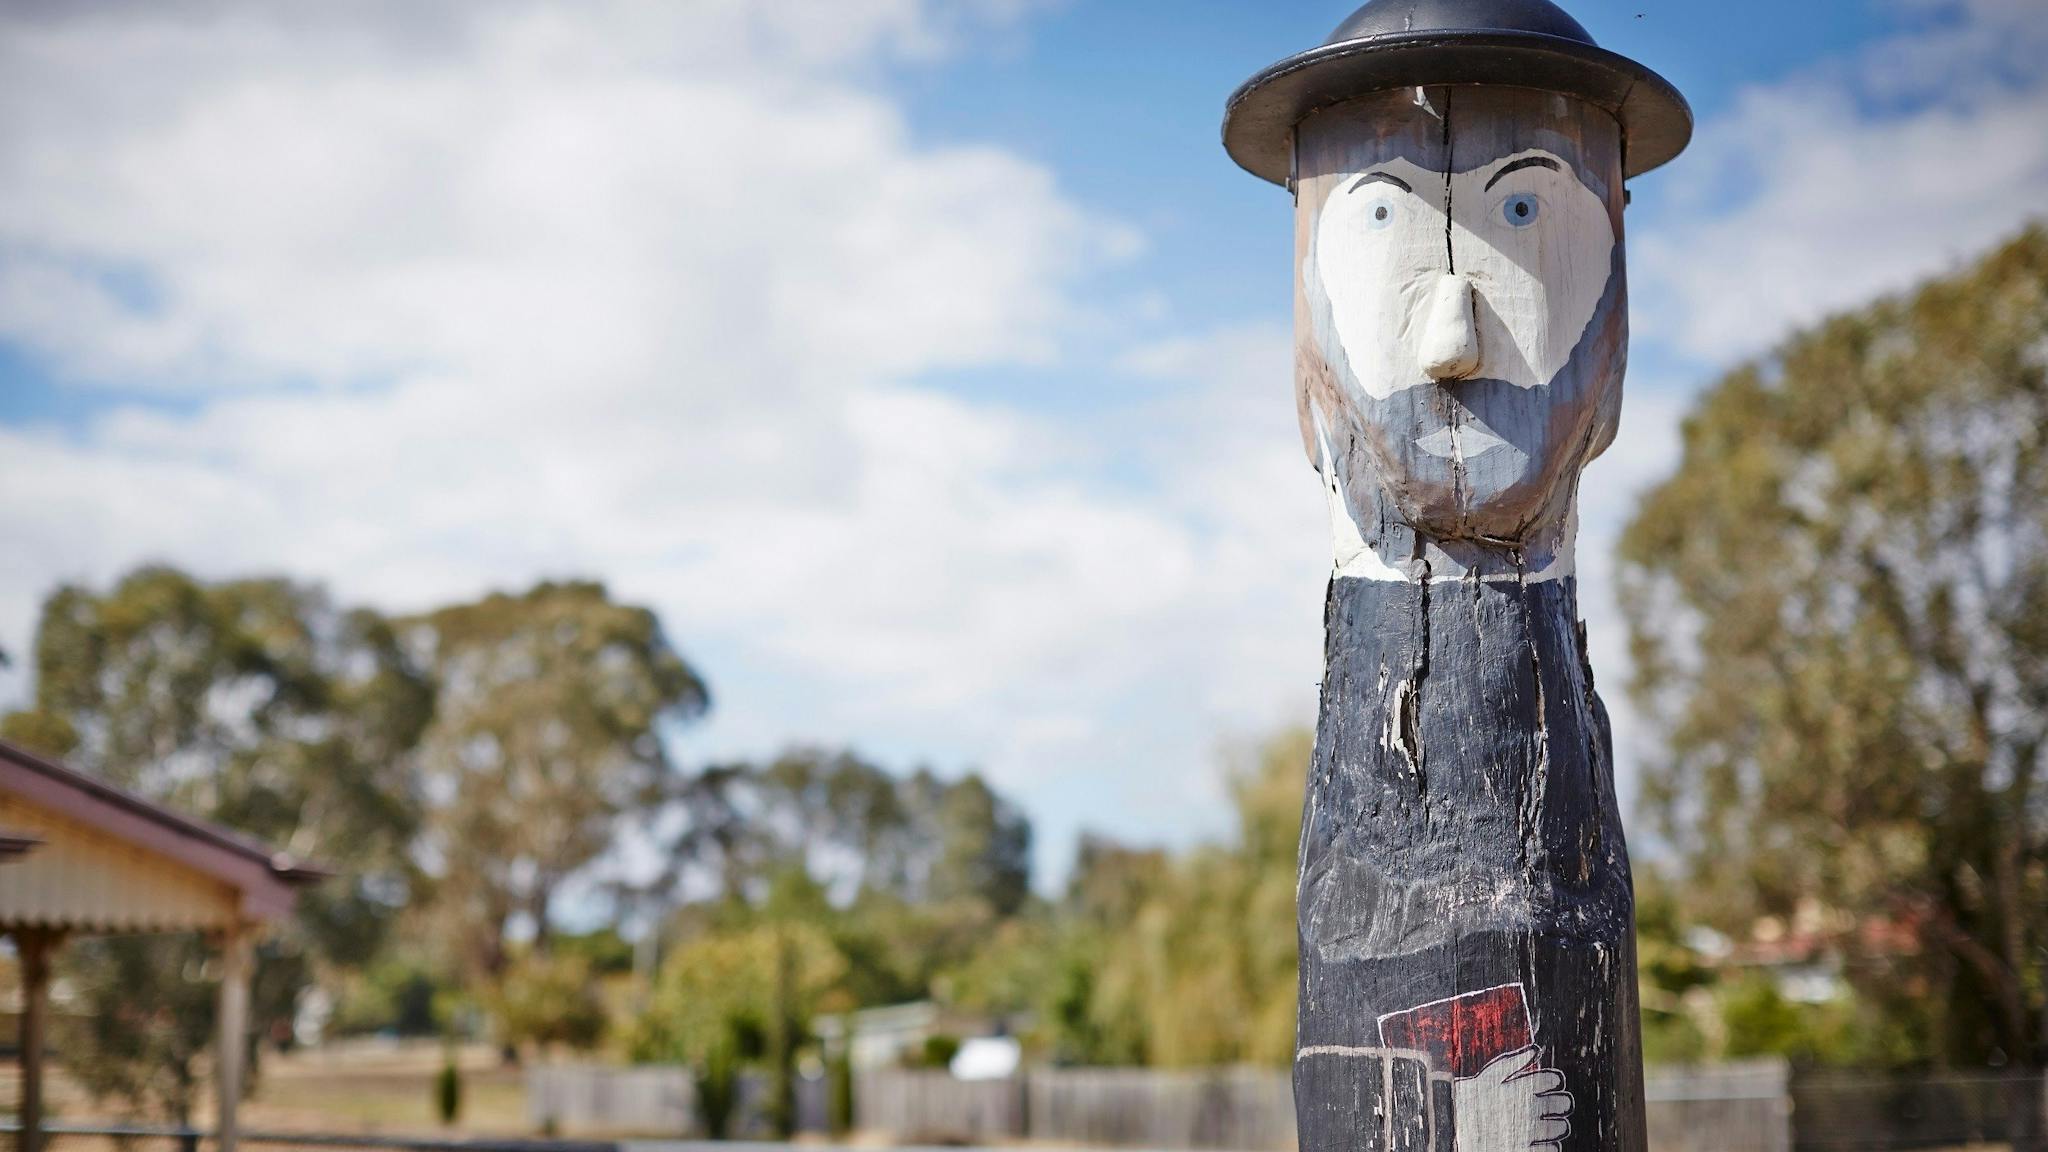 Bollard that looks like a bearded man, wearing a hat, and holding a book, trees, clouds, sunny day.